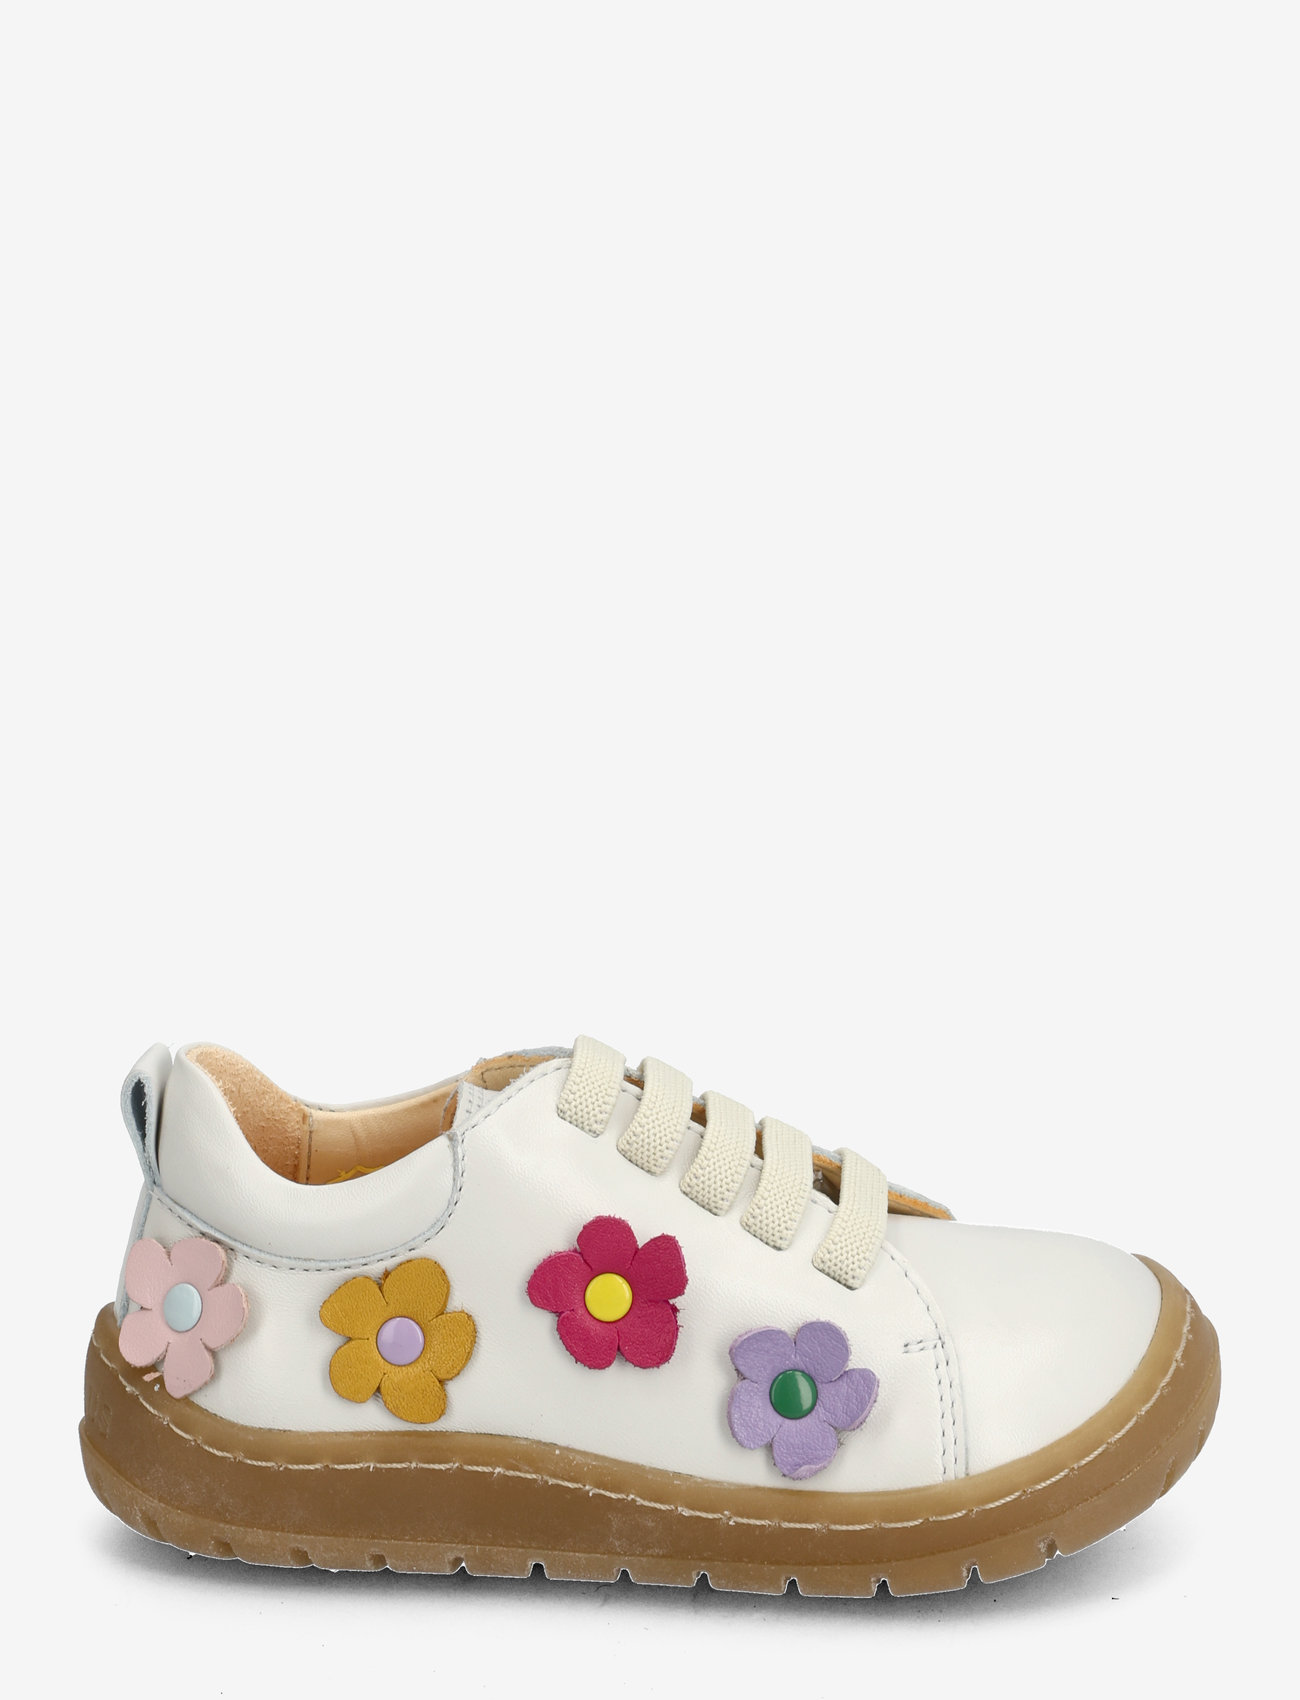 ANGULUS - Shoes - flat - with lace - sommerschnäppchen - 1493/a002 off white/flowers - 1